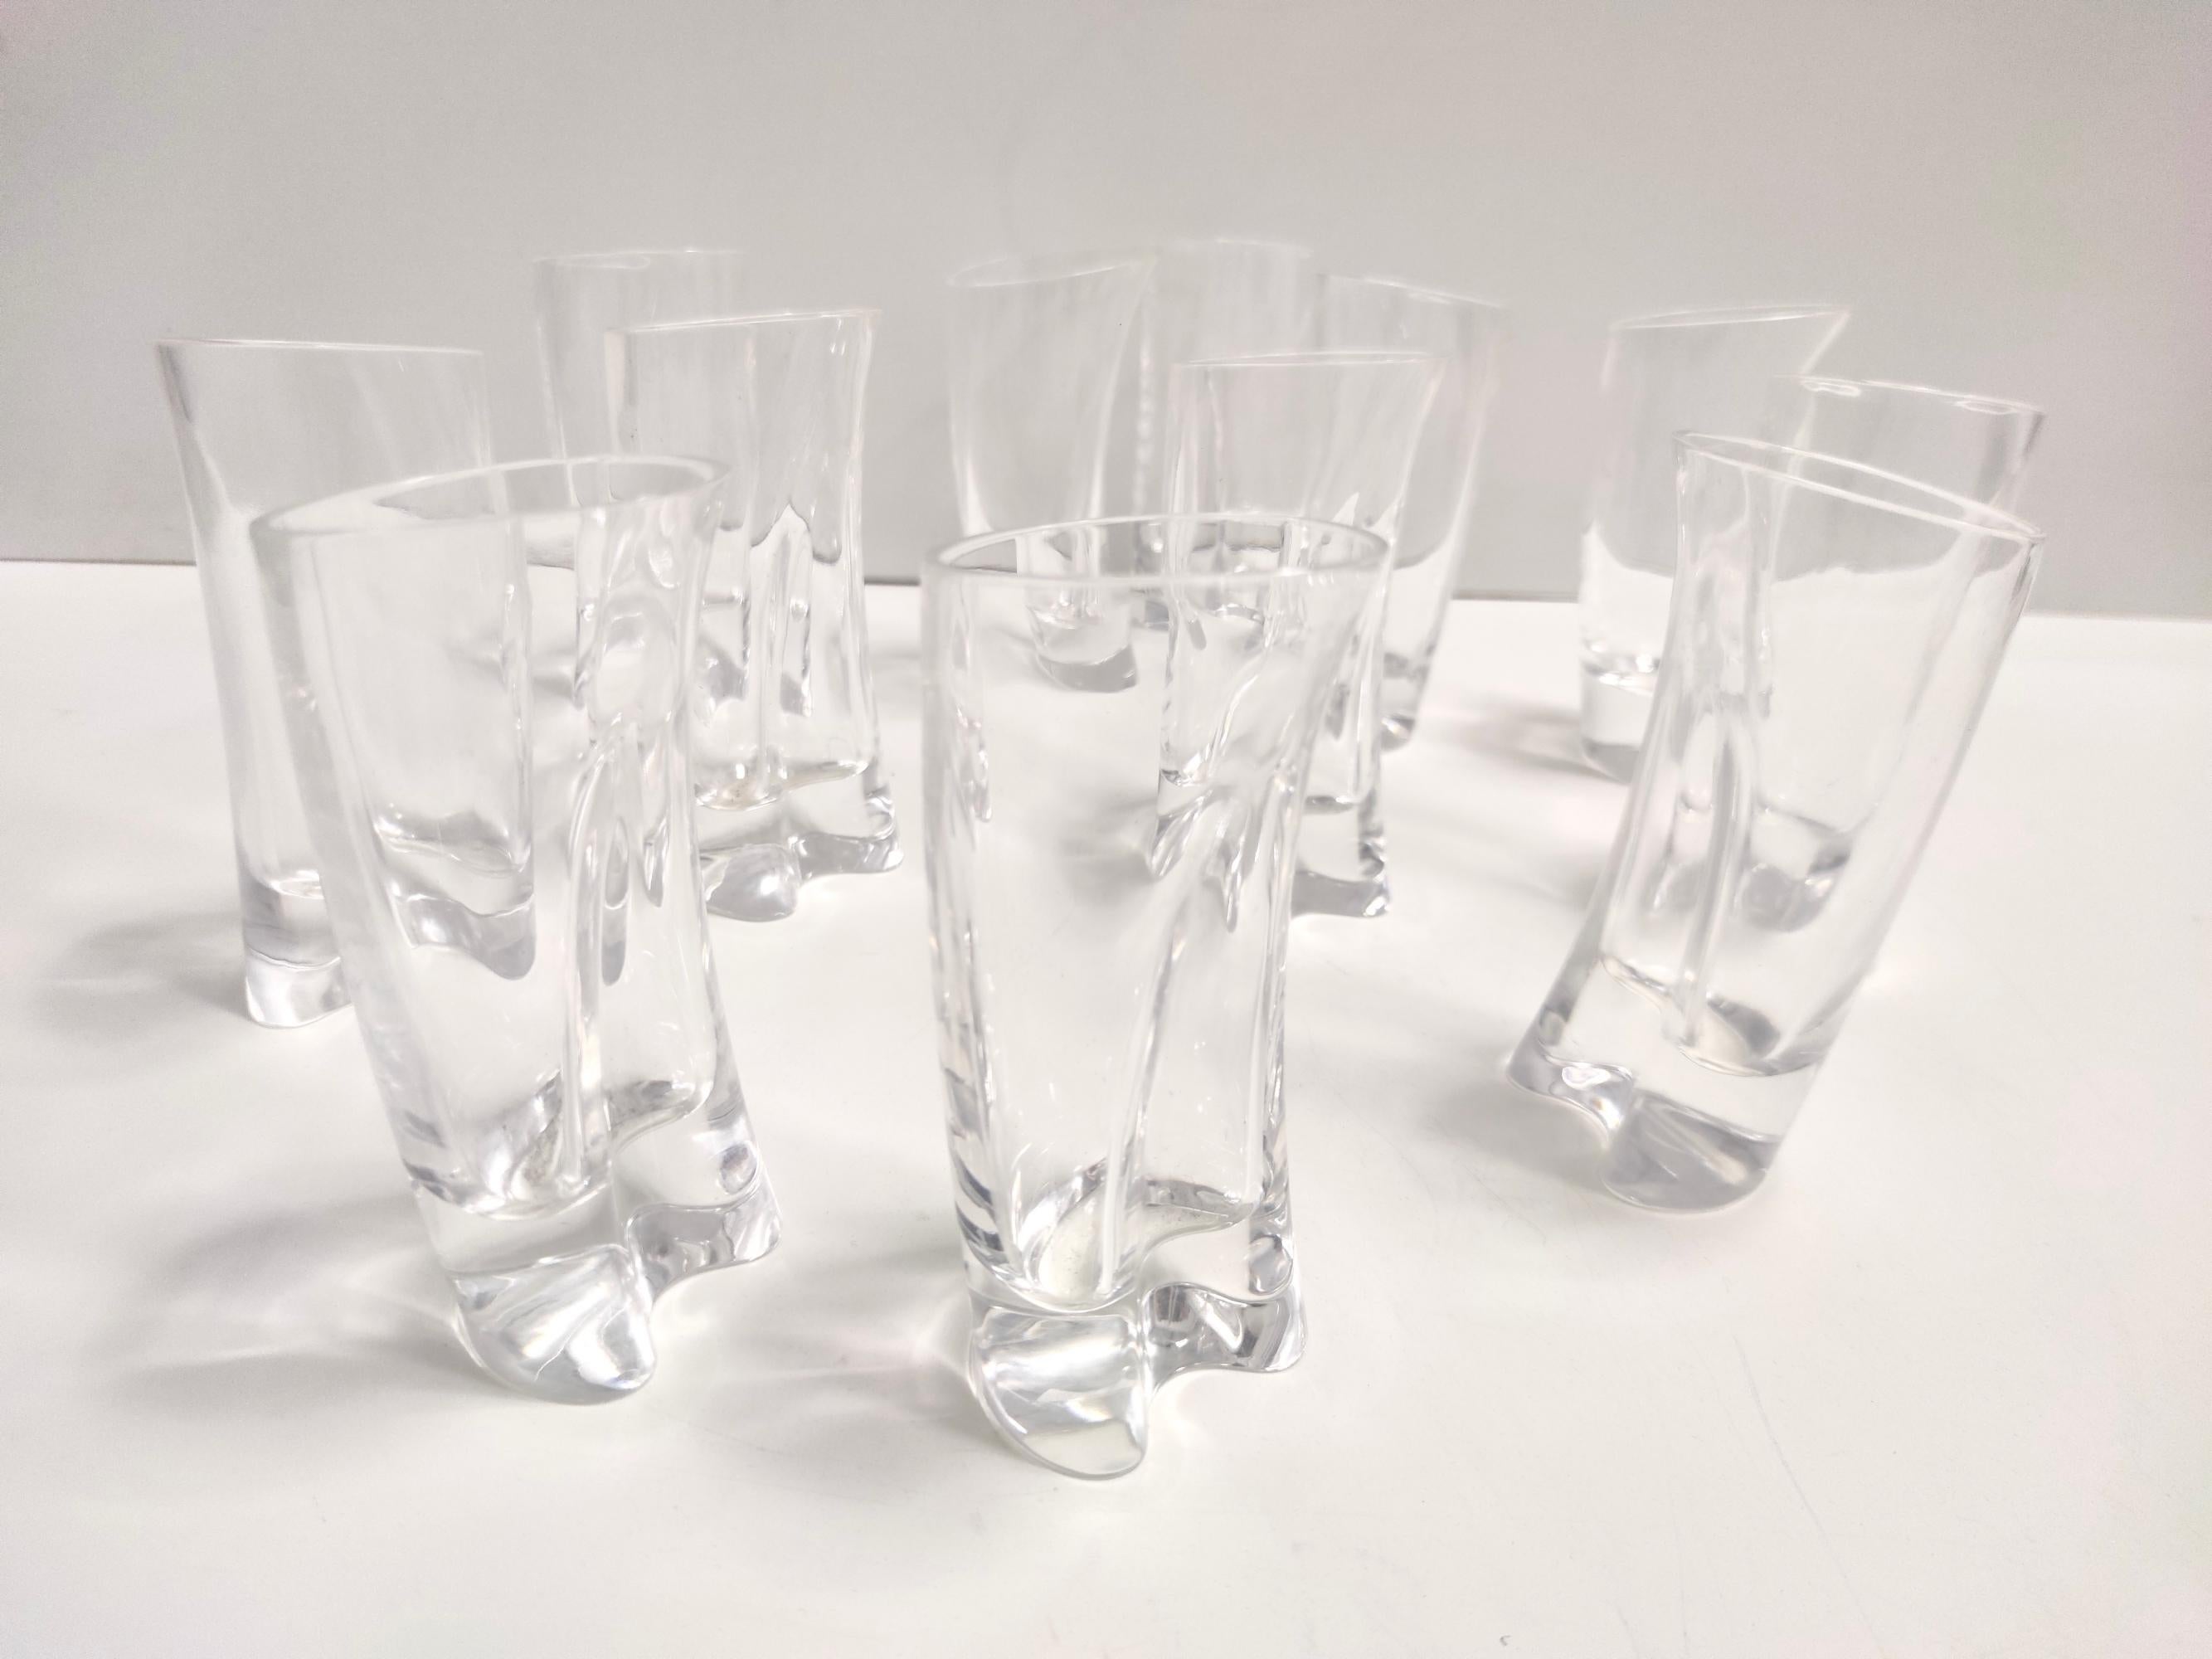 Set of Twelve Crystal Drinking Glasses by A.Mangiarotti for Cristallerie Colle In Excellent Condition For Sale In Bresso, Lombardy